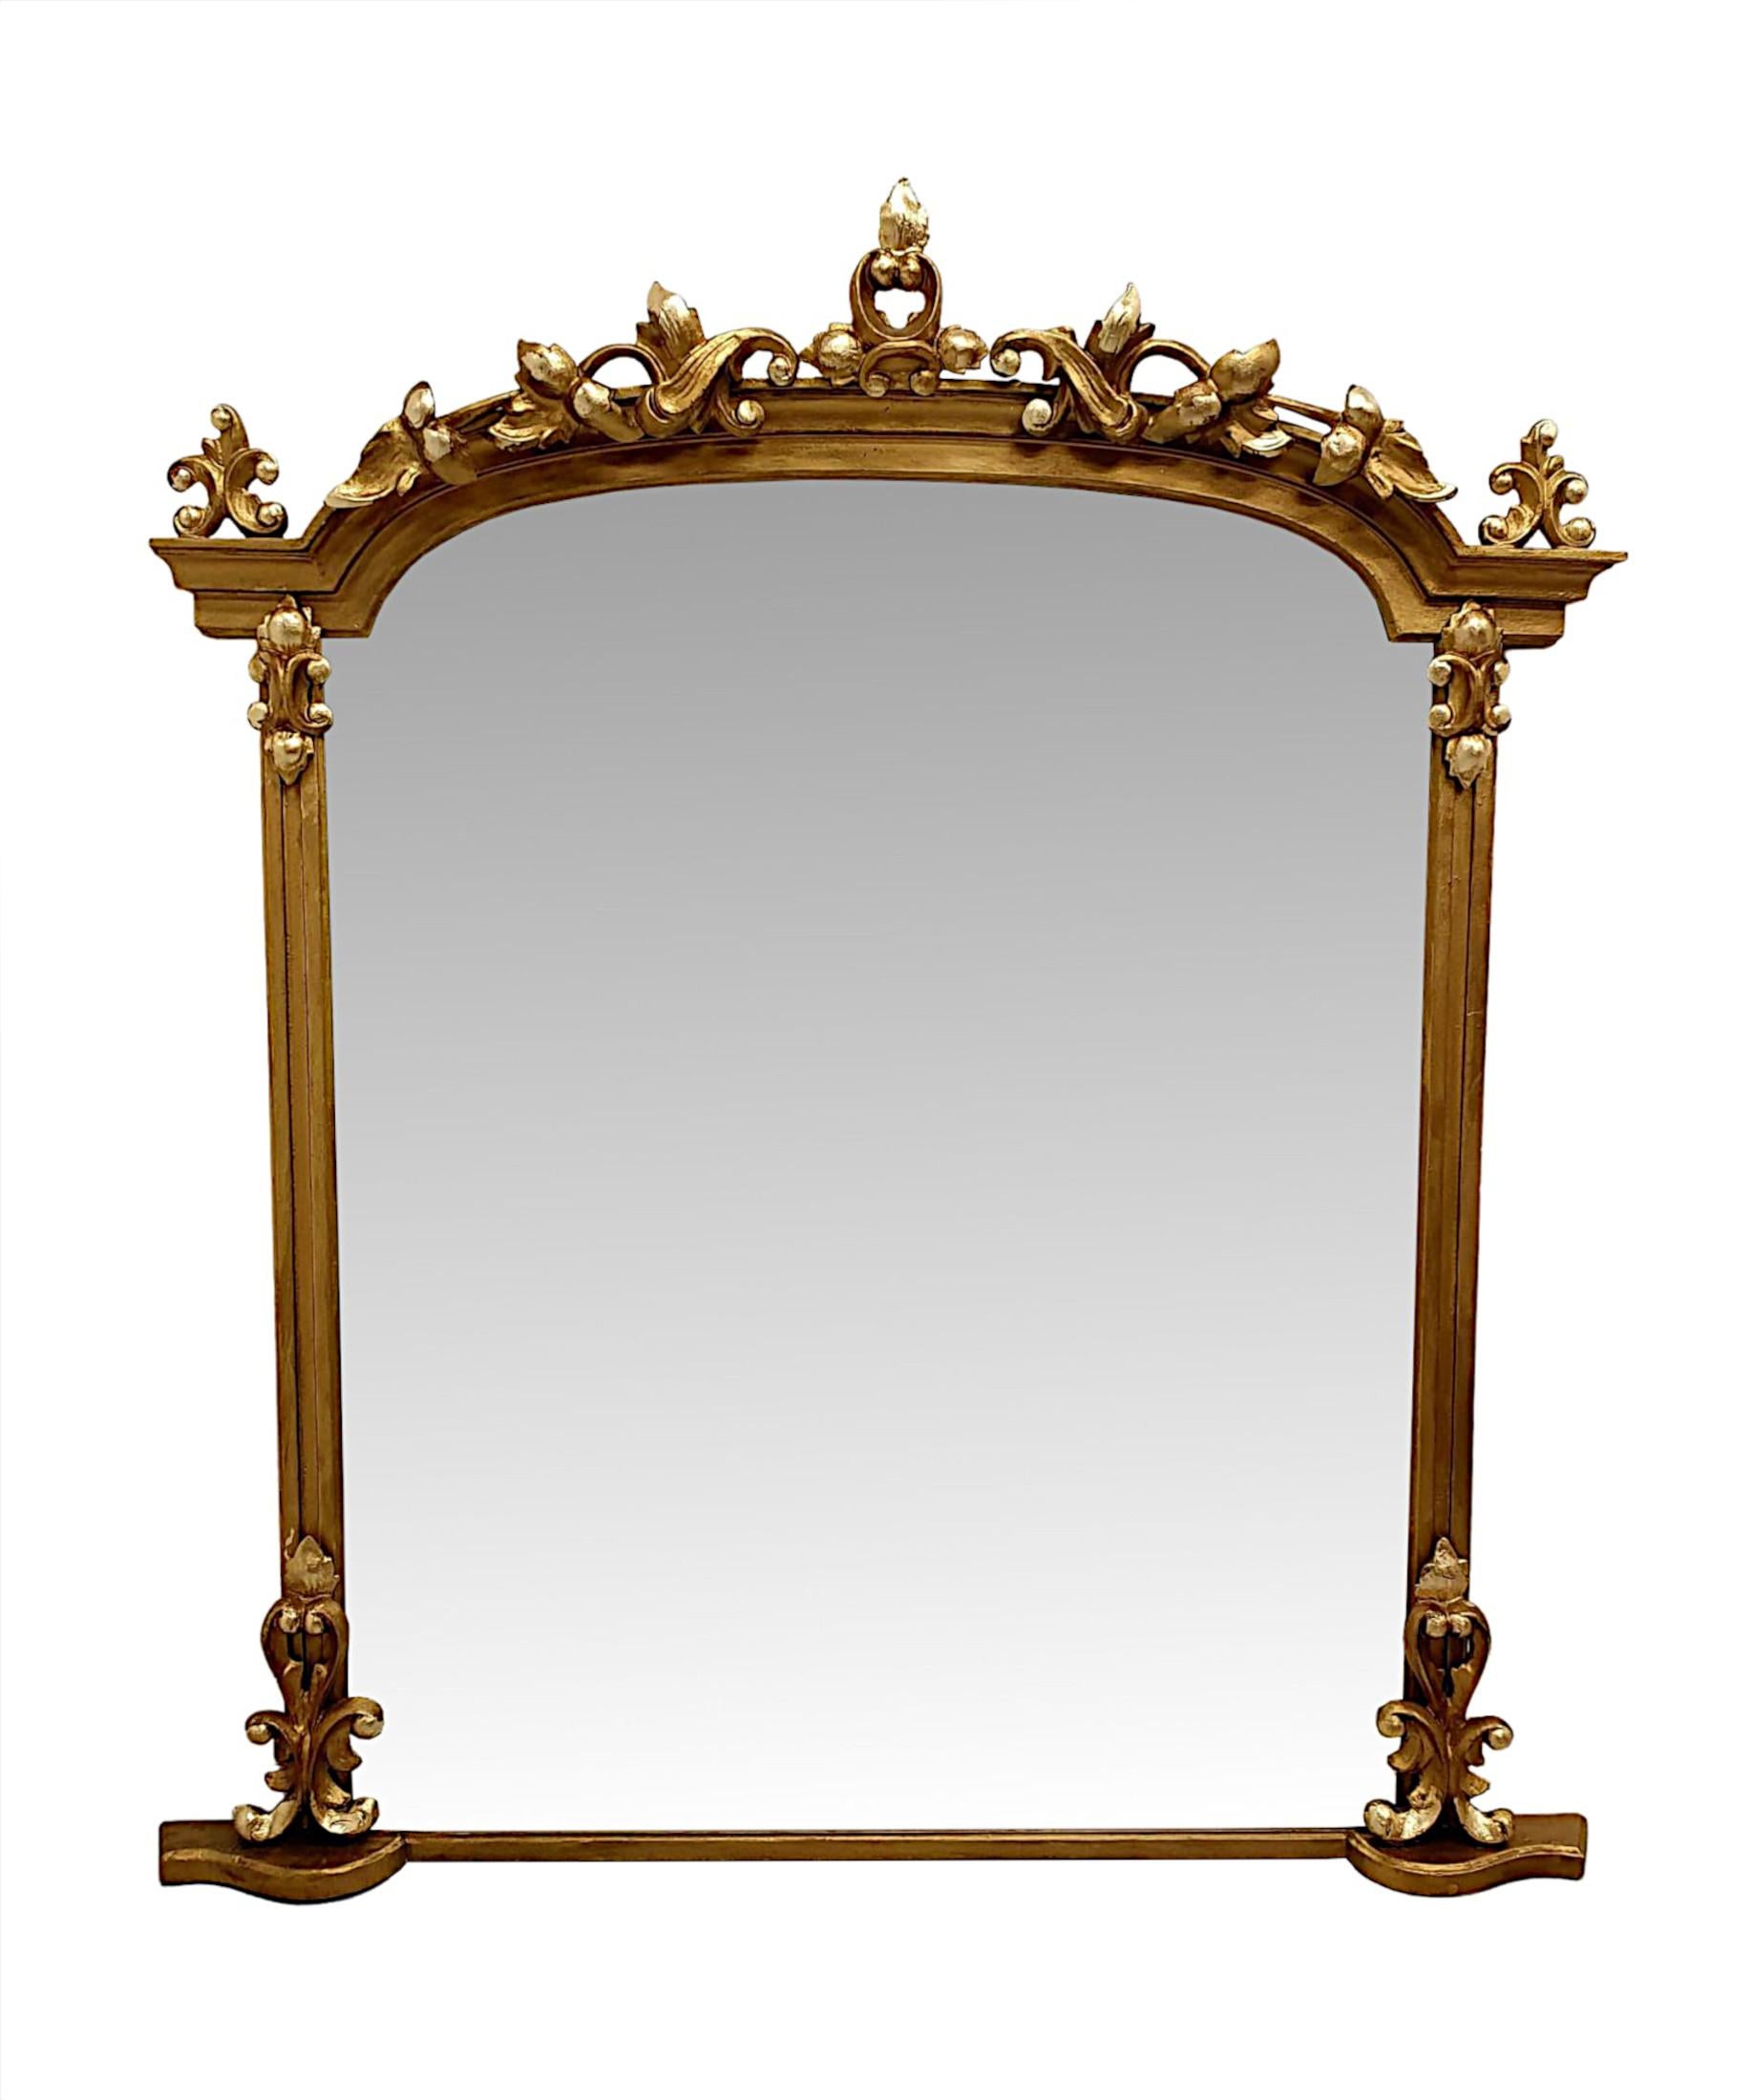 A very rare and fine pair of 19th Century giltwood overmantle mirrors.  The bevelled mirror glass plate of shaped, rectangular form is set within a finely hand carved, moulded and fluted giltwood frame surmounted with curved architectural